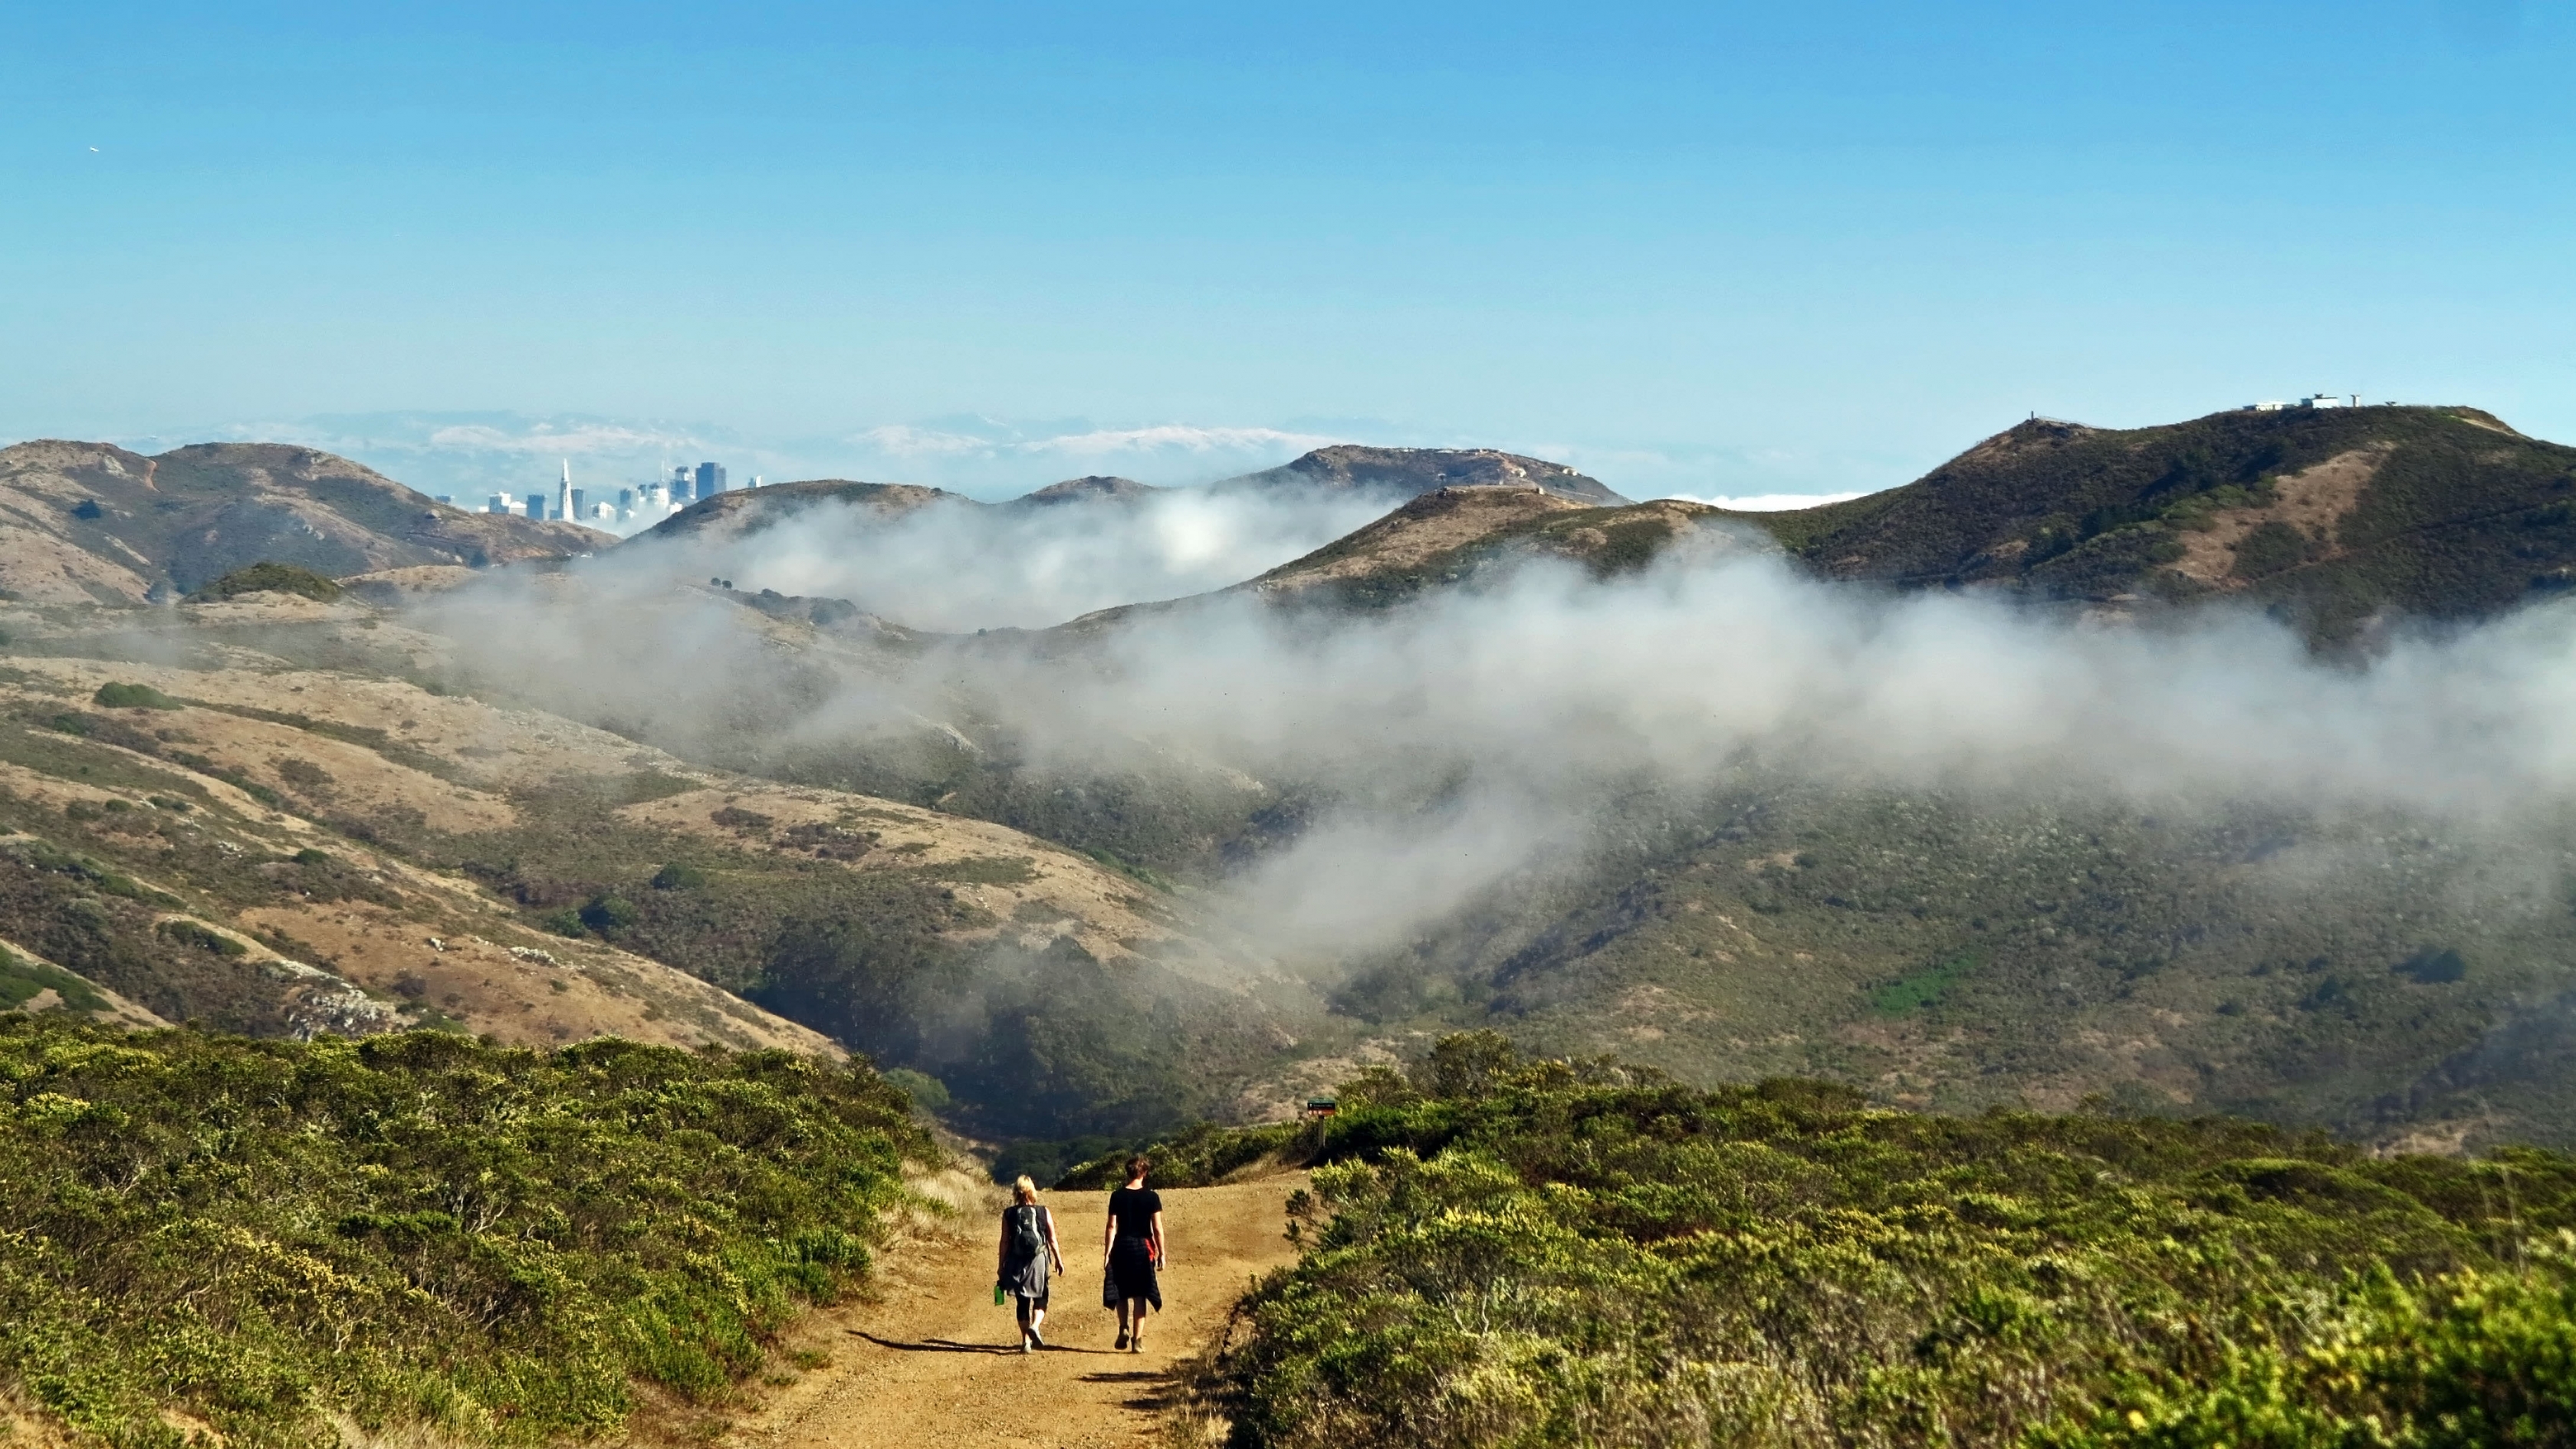 Hikers in the Marin Headlands in Golden Gate National Recreation Area.